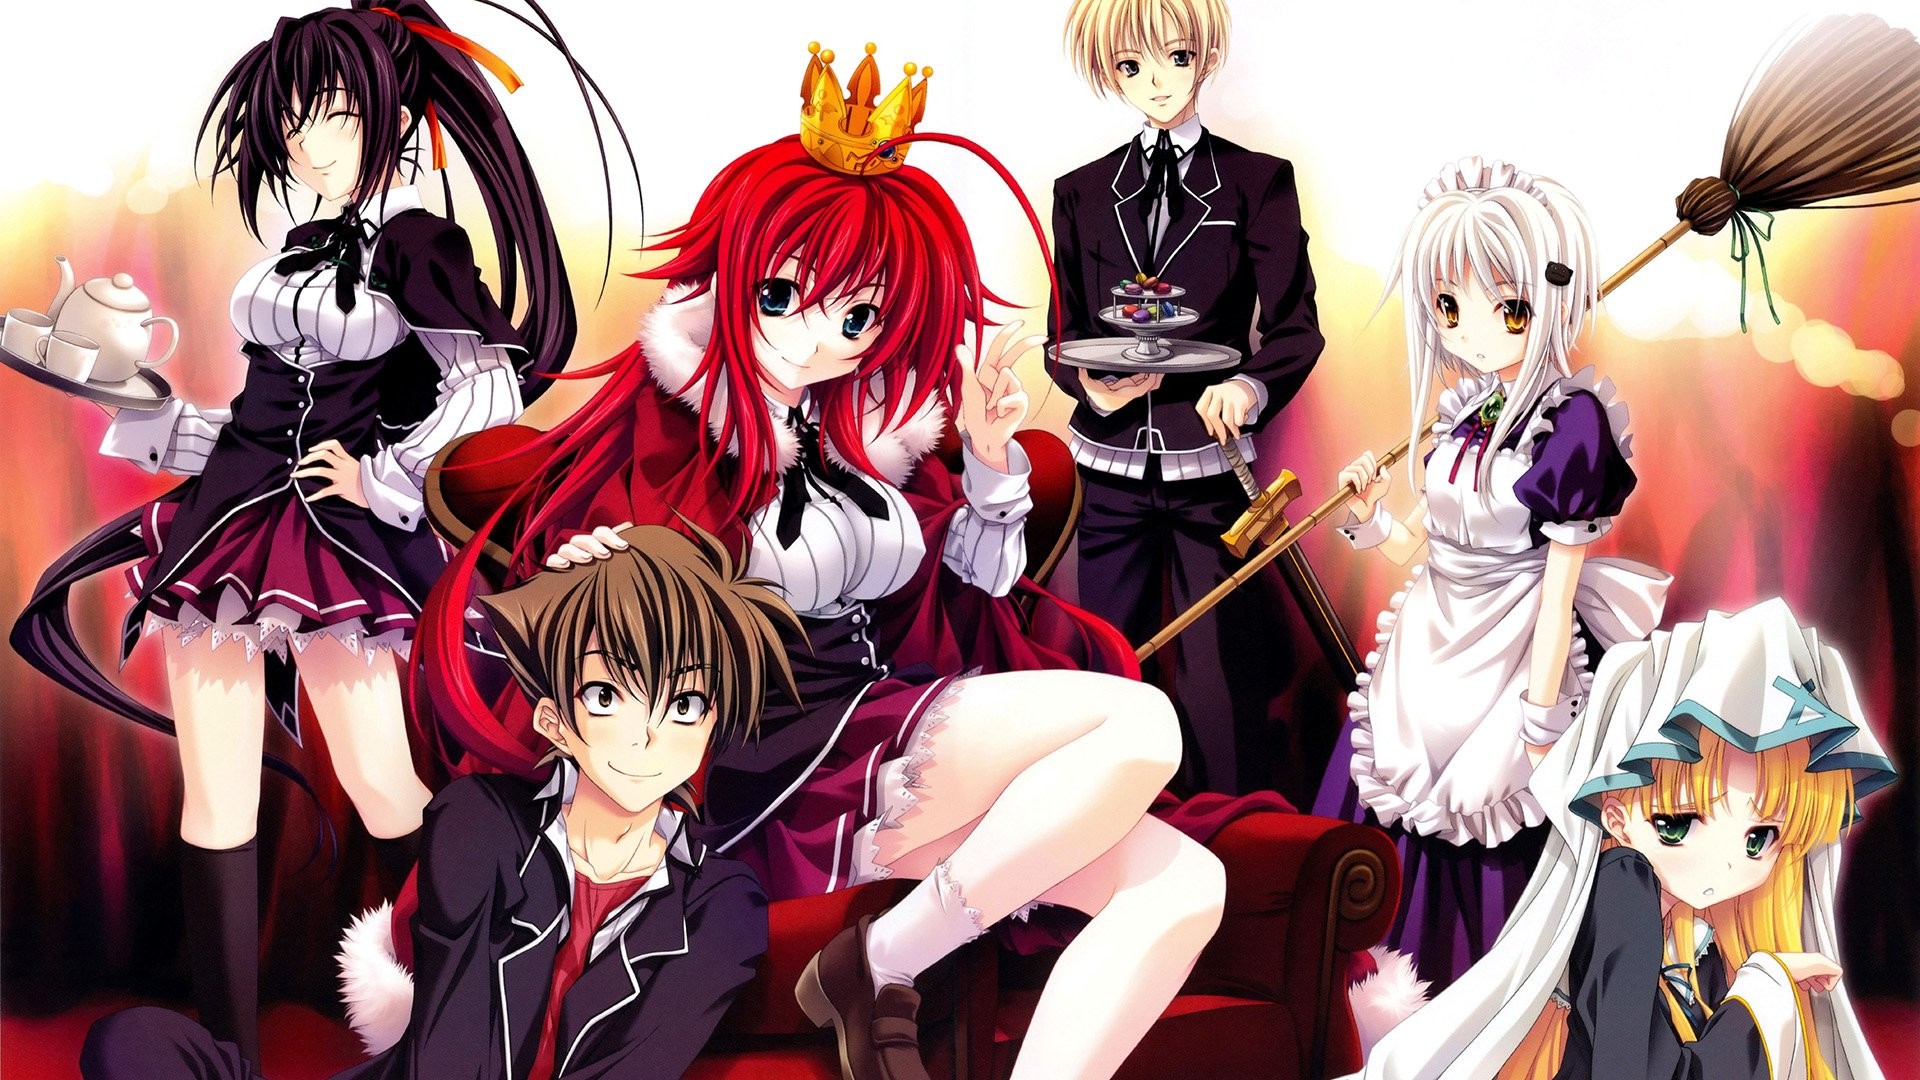 High School Dxd Hd Wallpapers Wallpapertag Images, Photos, Reviews